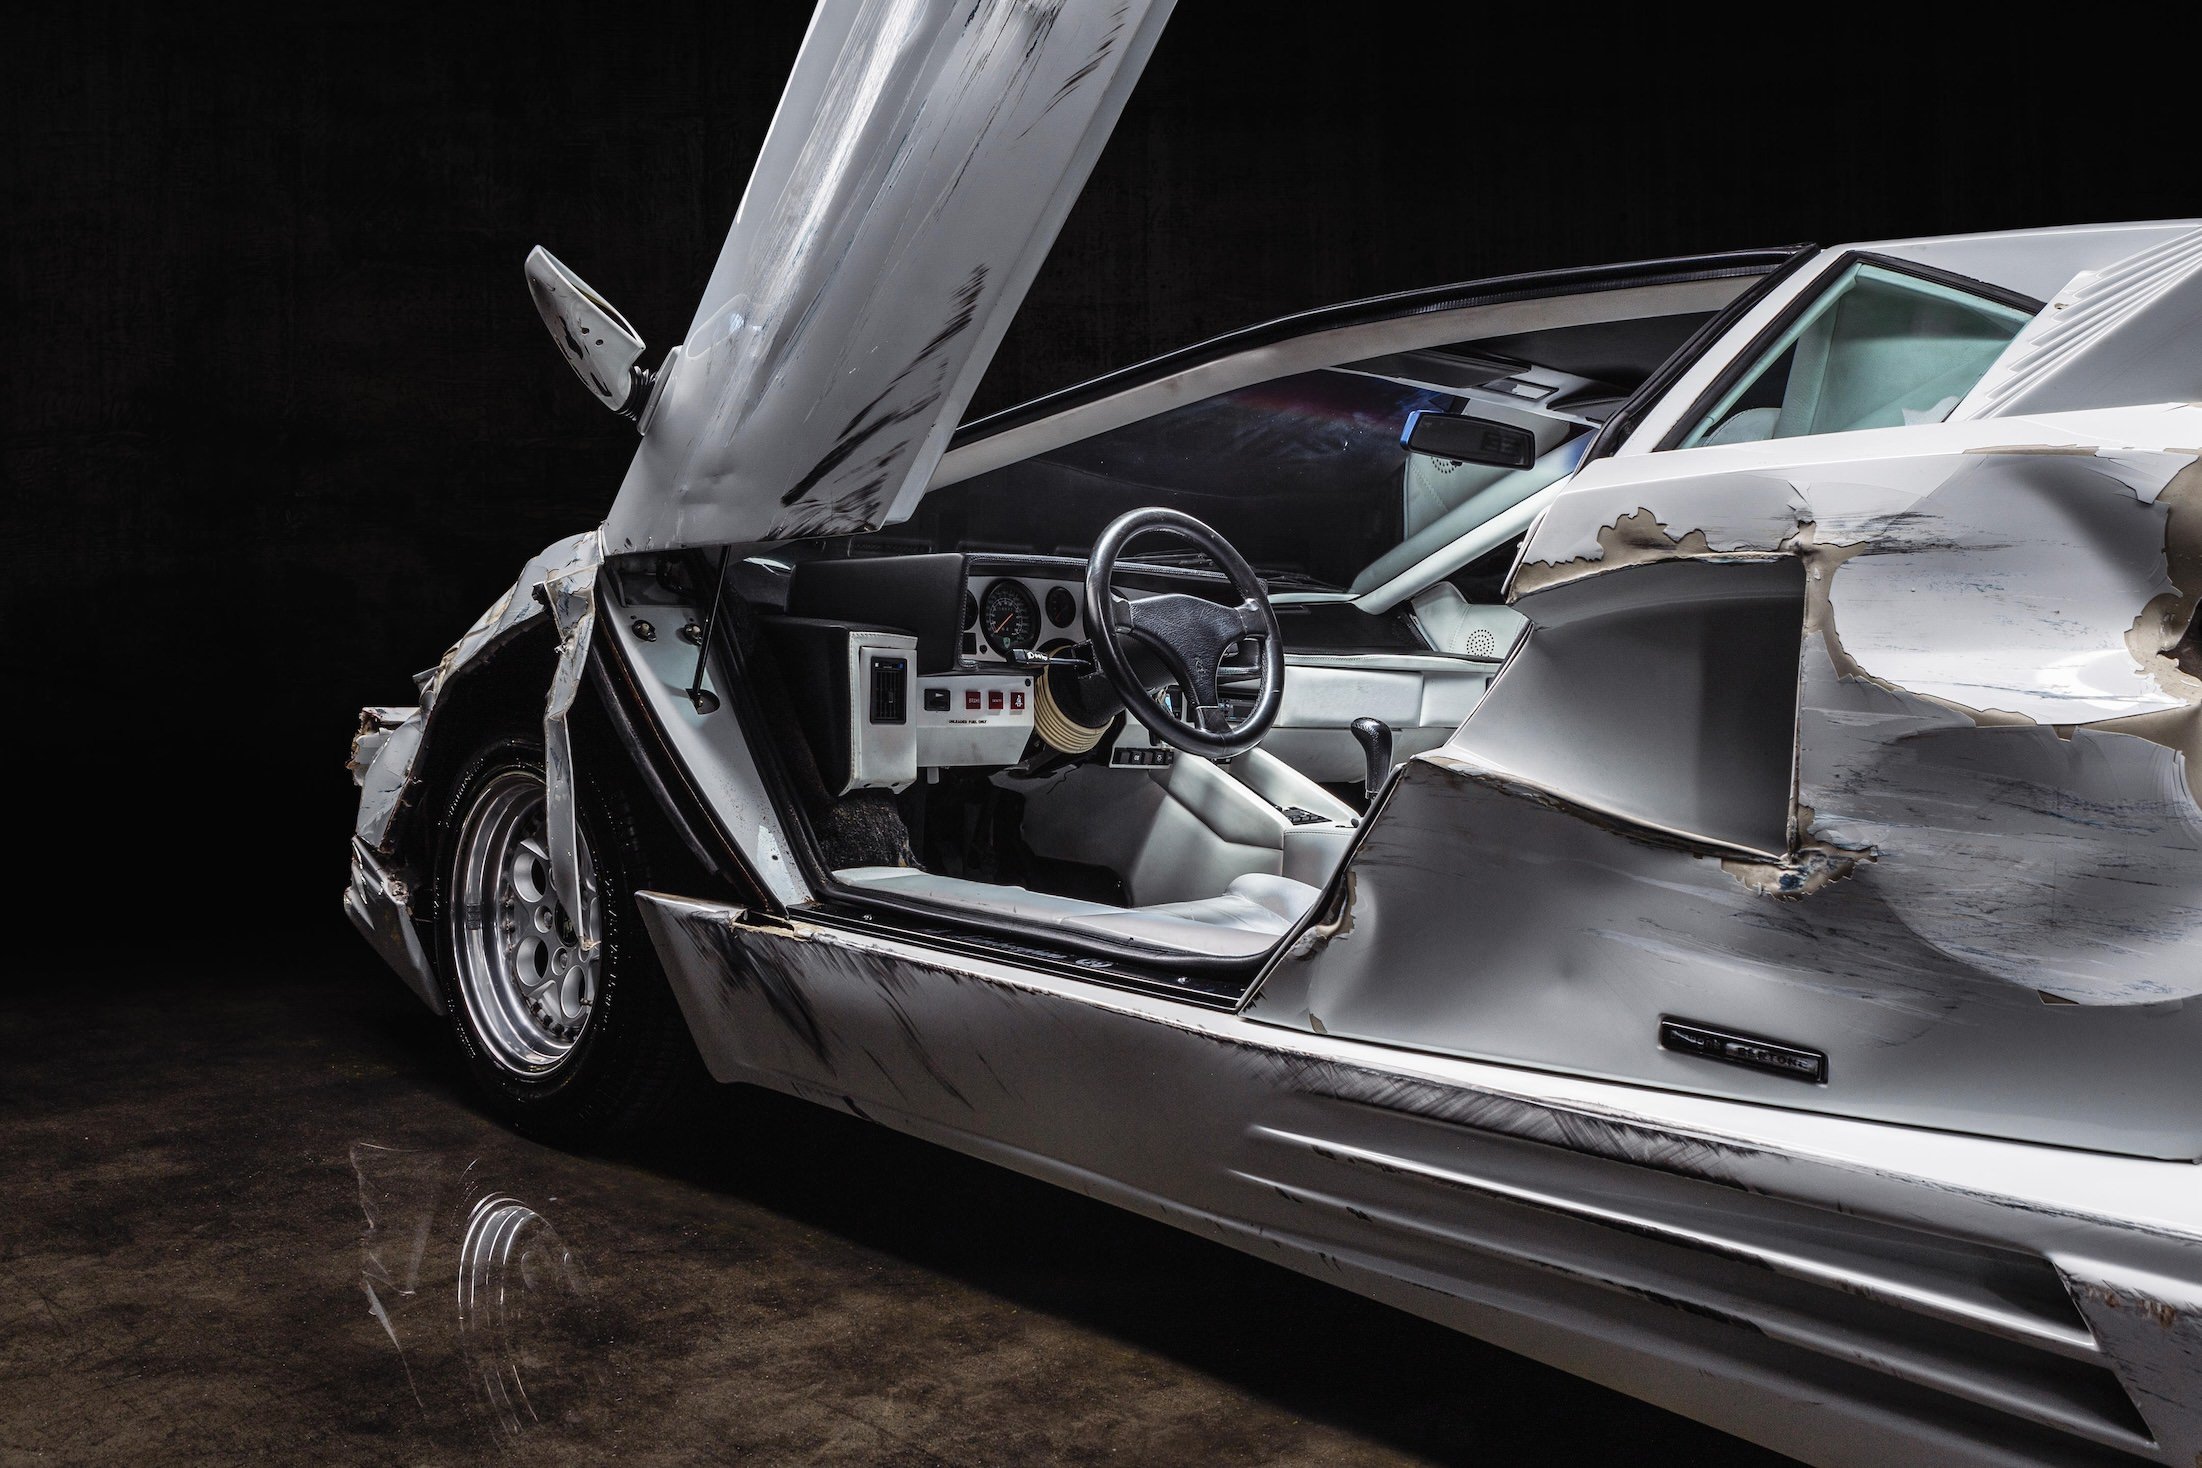 For Sale: The Wrecked Lamborghini Countach From The Wolf of Wall